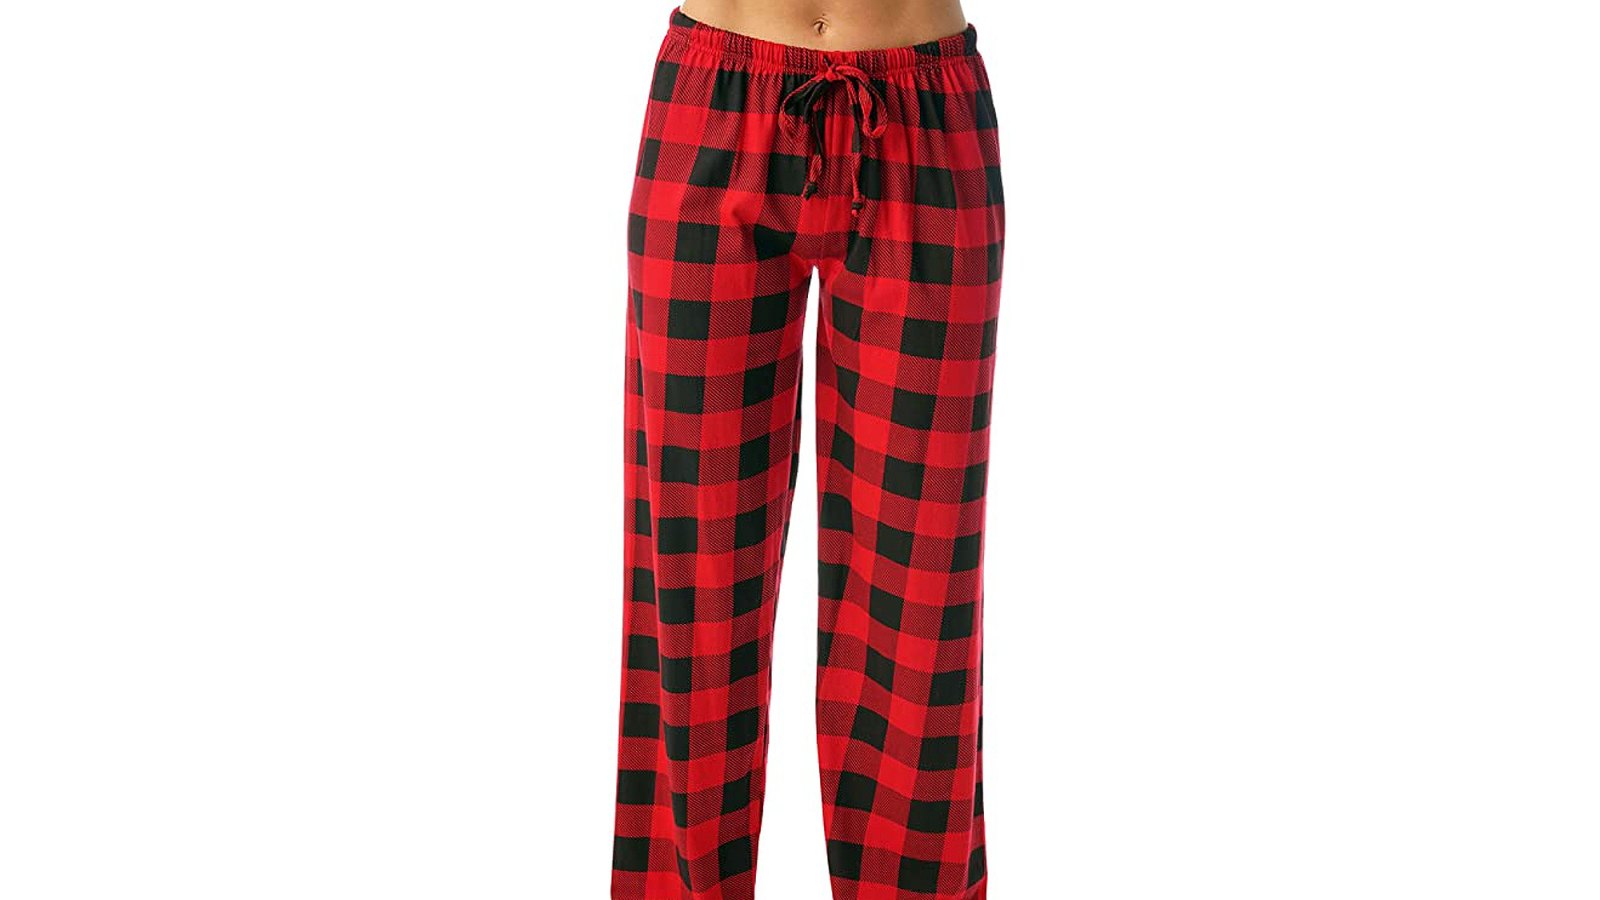 Just Love Festive Pajama Pants Are a Great Gift for the Entire Family ...